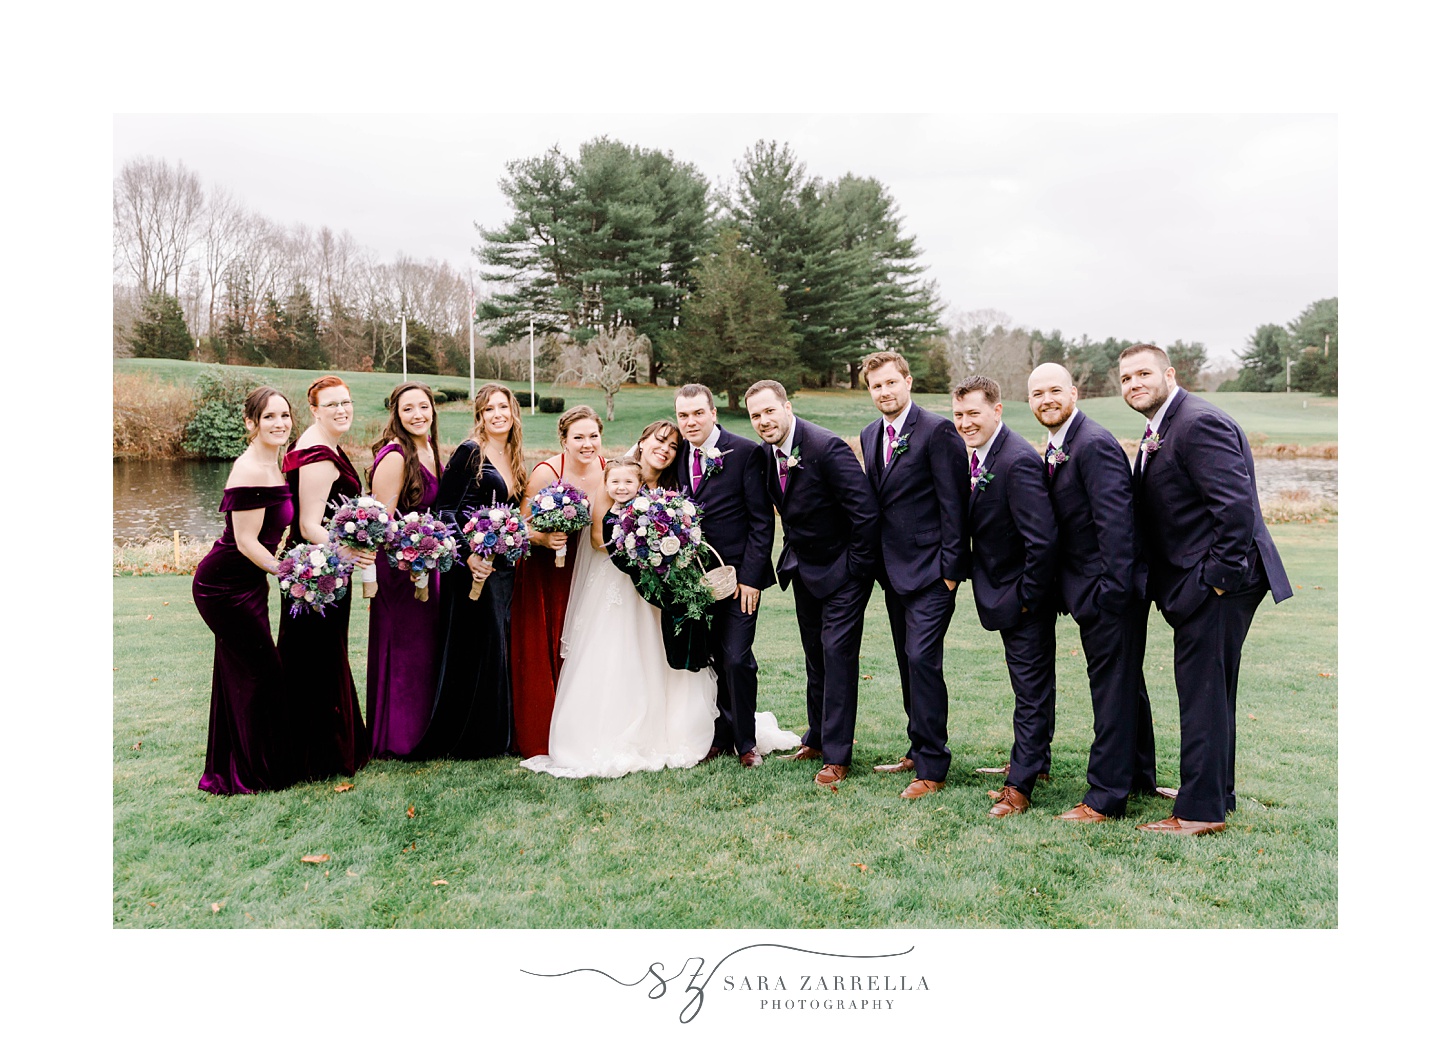 bride and groom stand together with wedding party in black and jewel-tone outfits